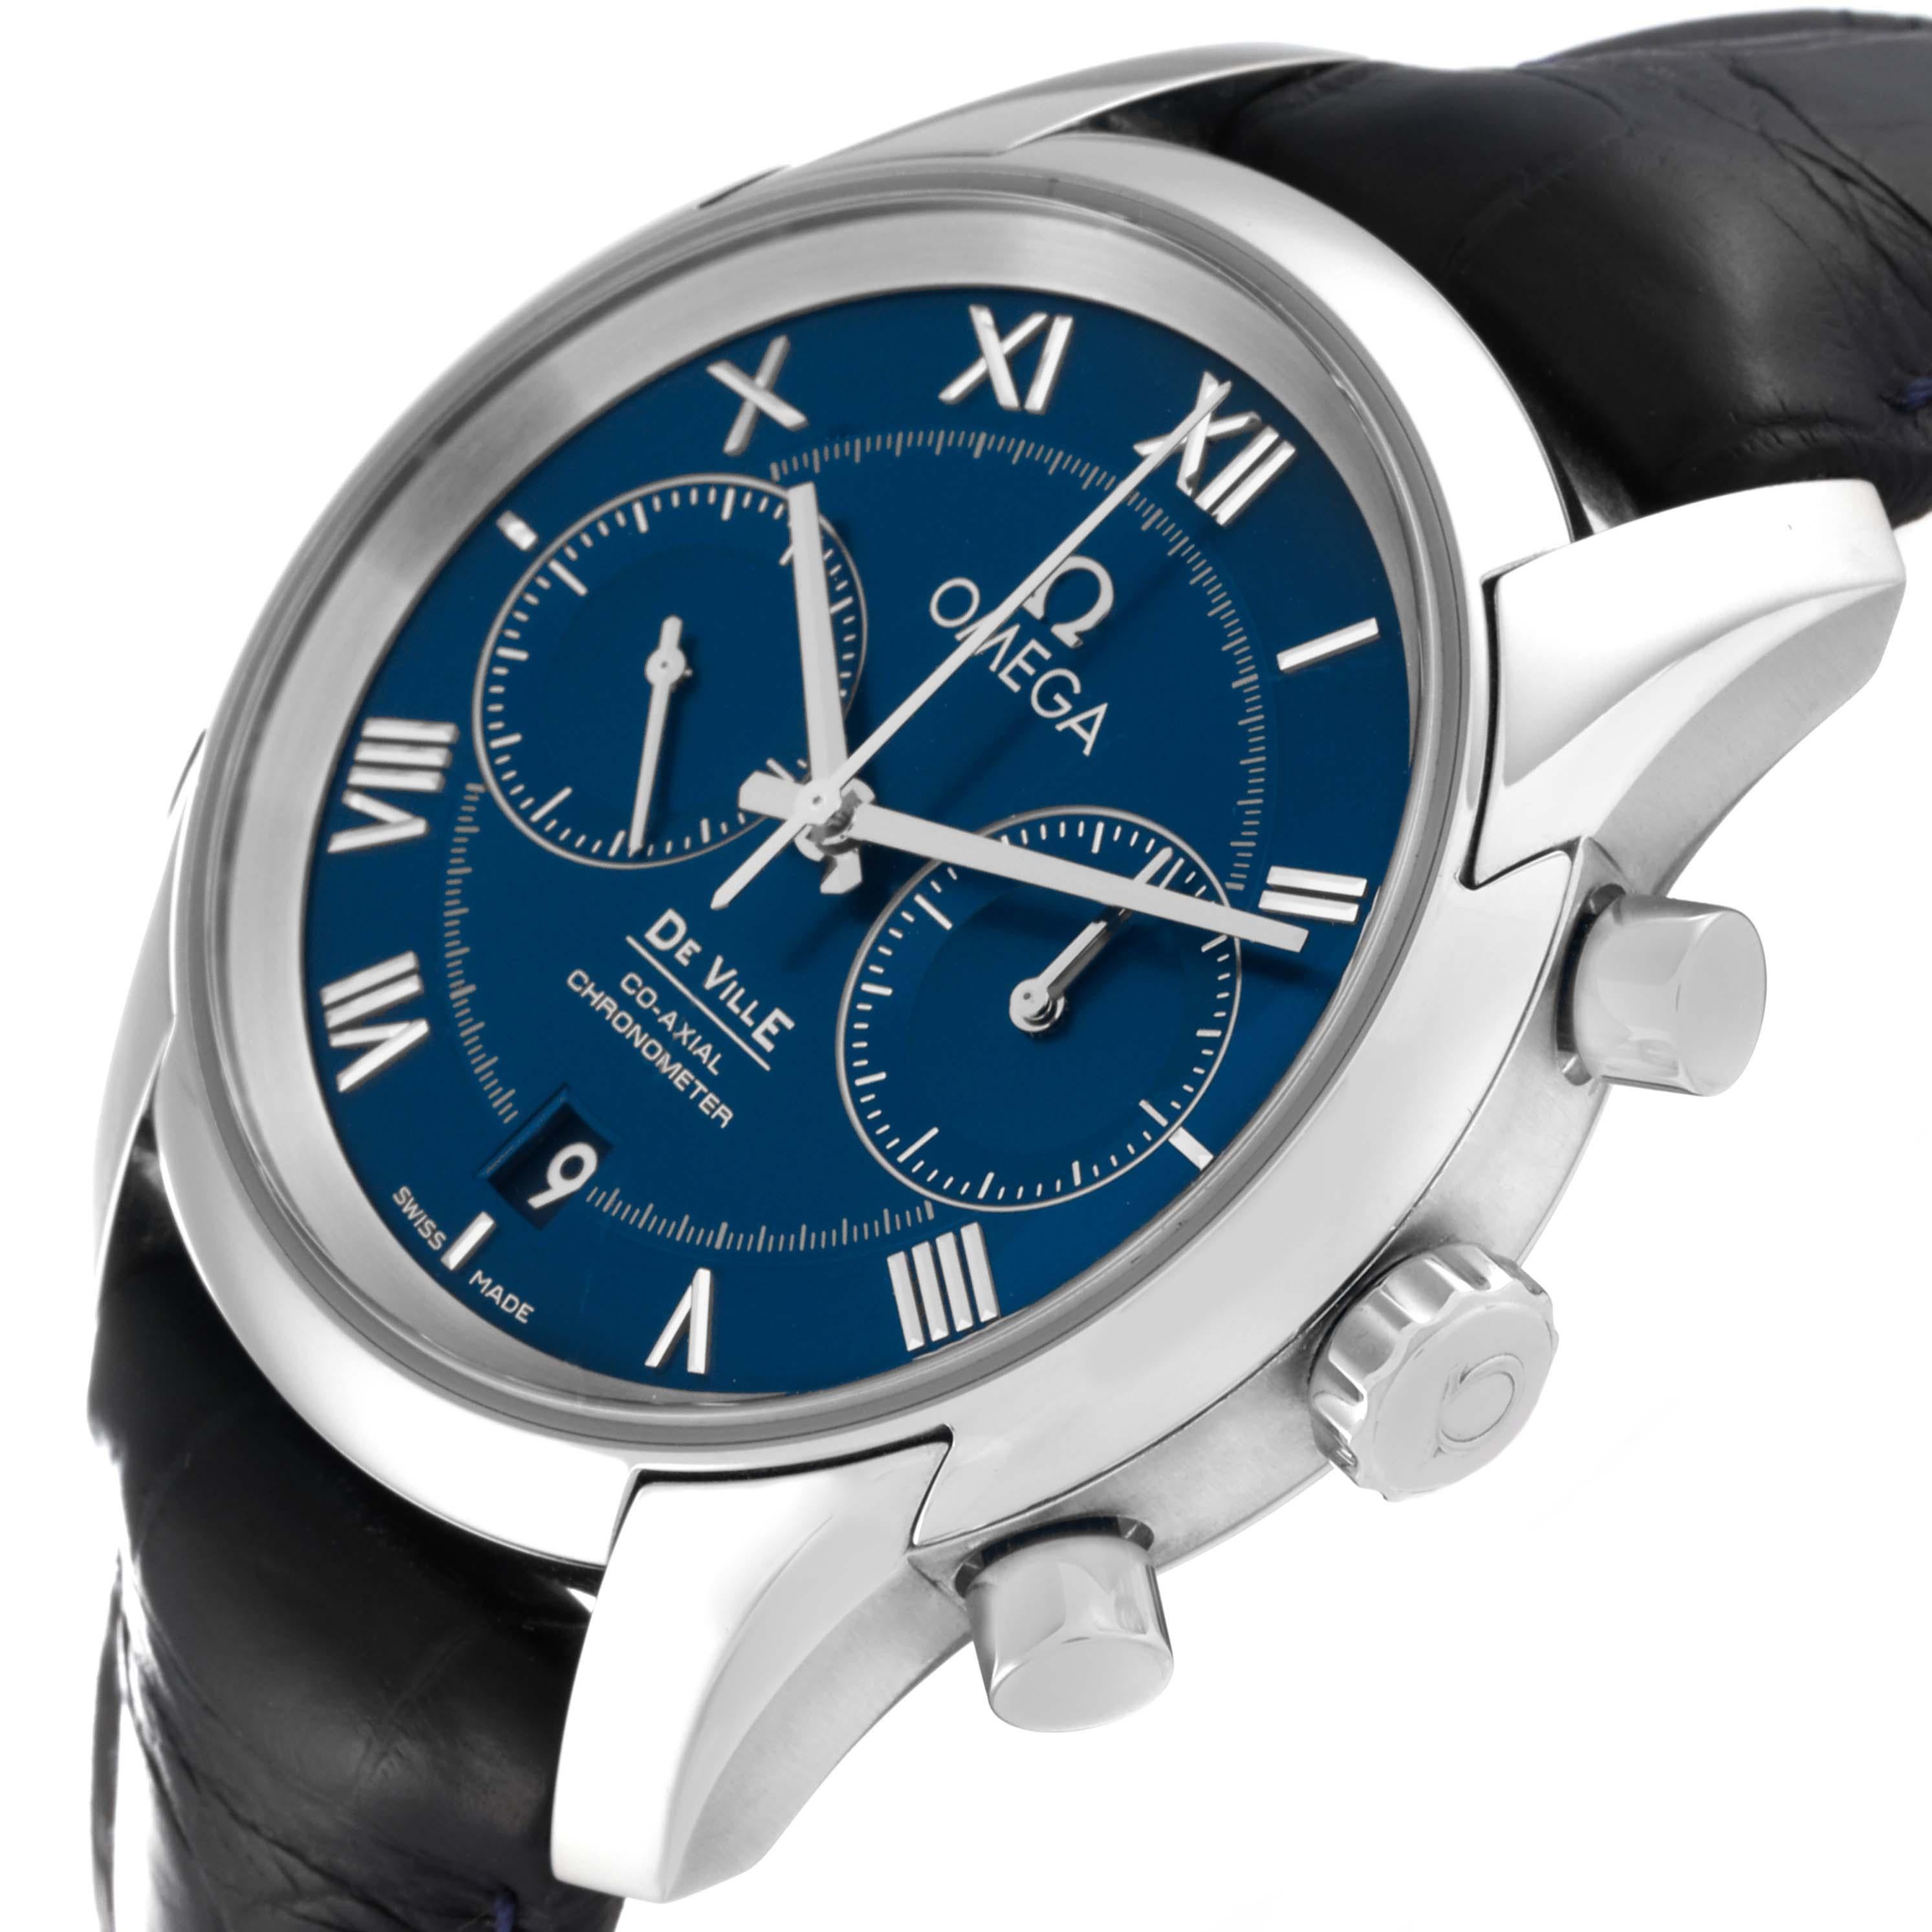 Omega DeVille 42 Blue Dial Steel Mens Watch 431.13.42.51.03.001 Box Card For Sale 1